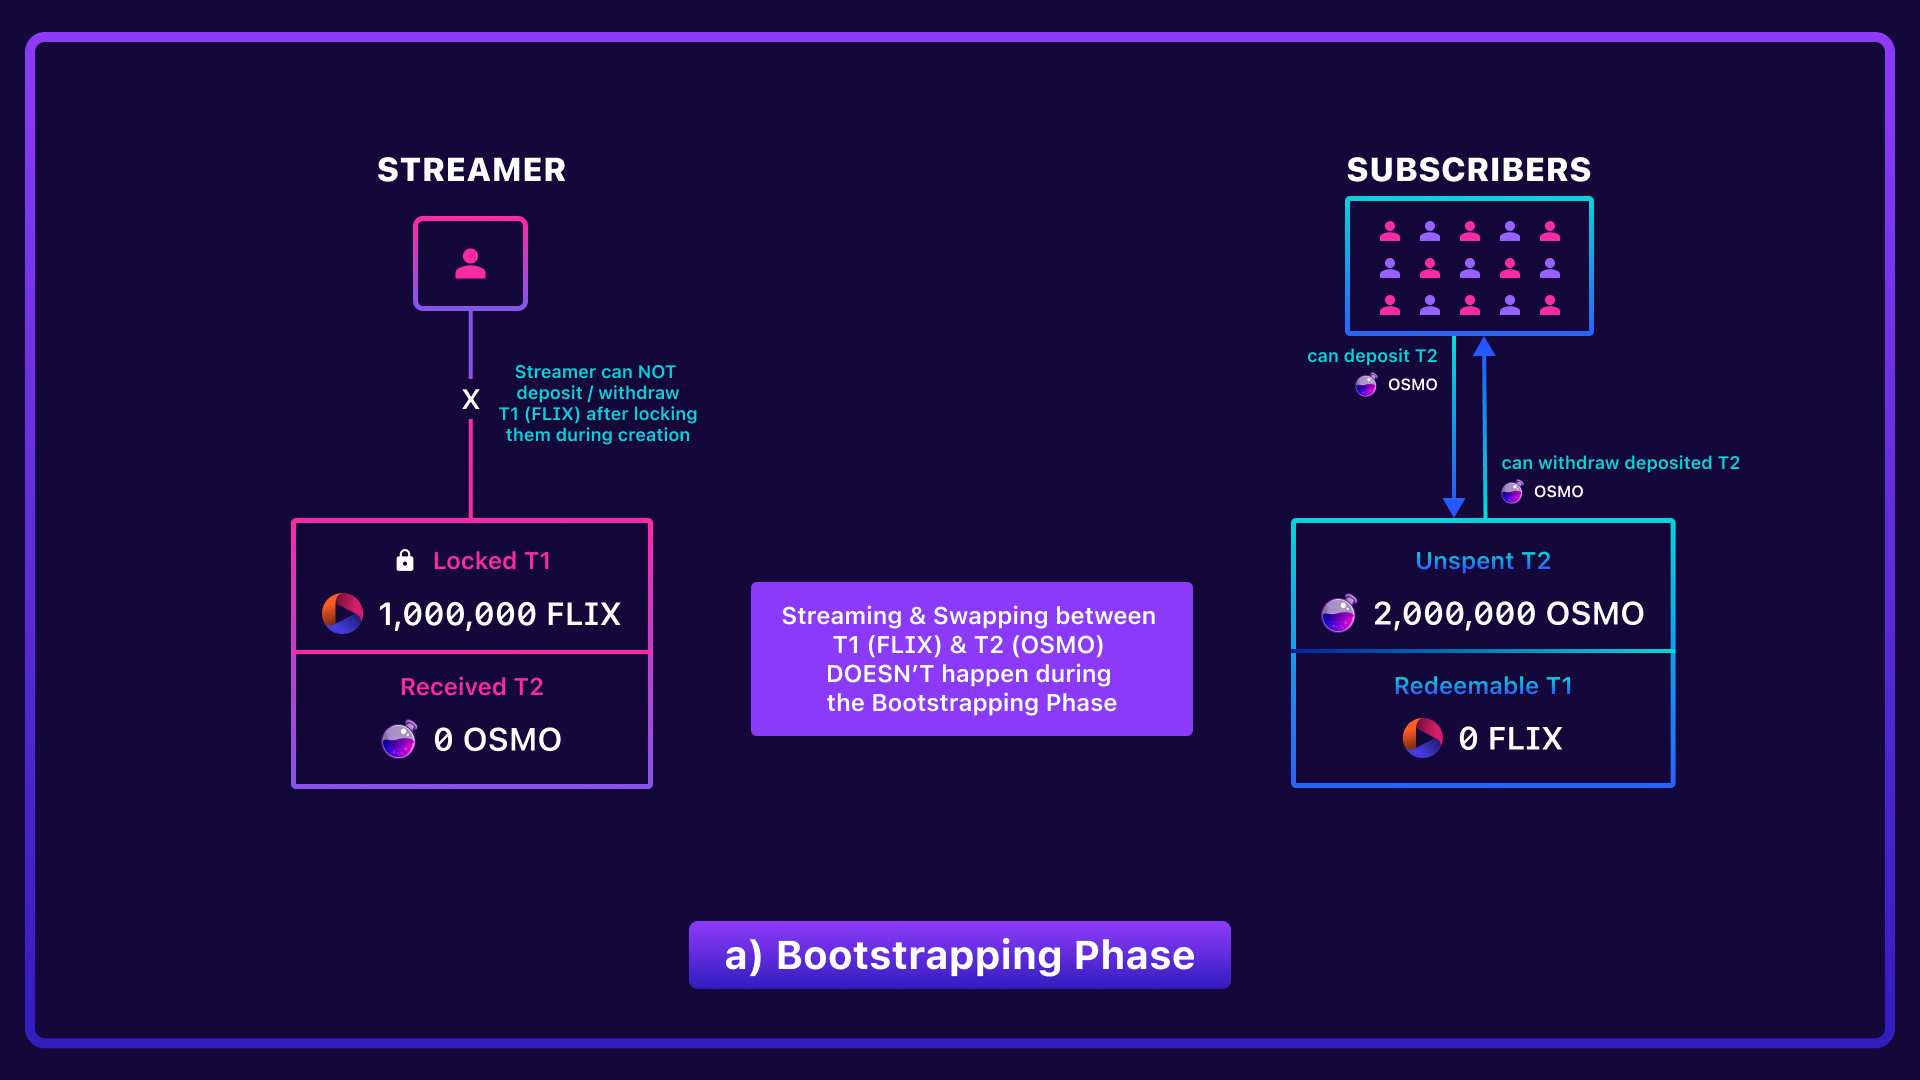 StreamSwap during the Bootstrapping Phase